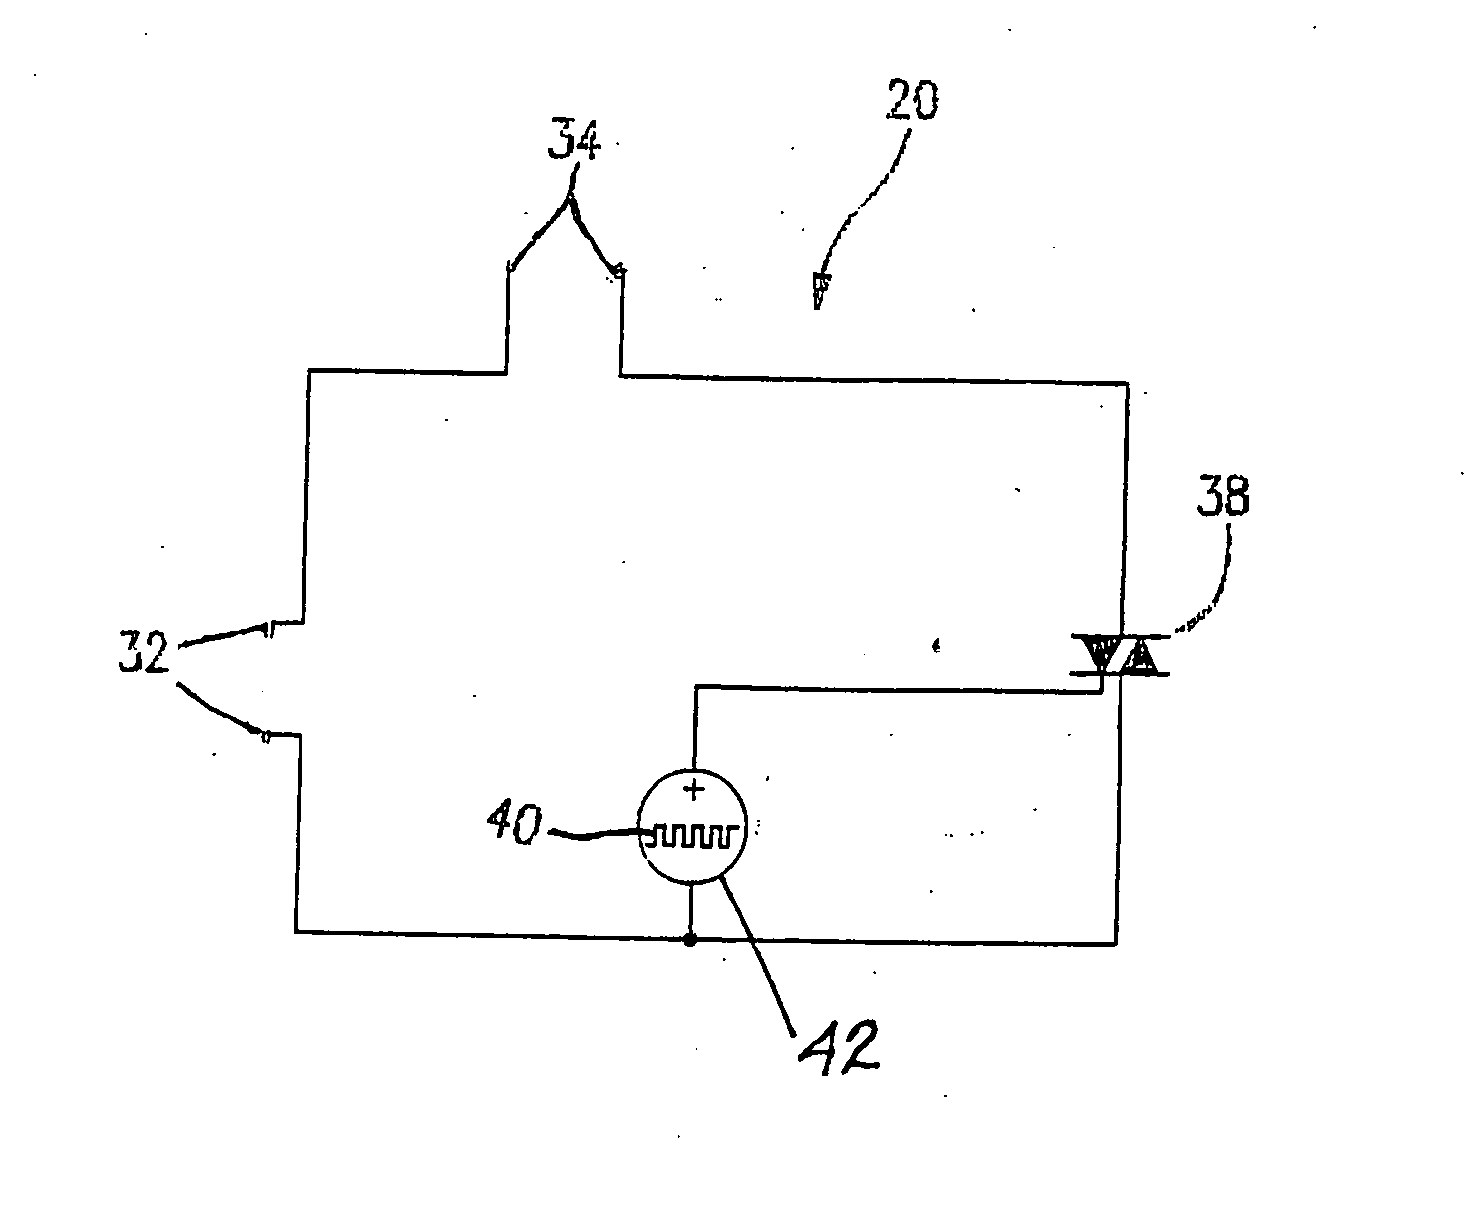 Method of soft-starting a switching power supply containing phase-control clipping circuit